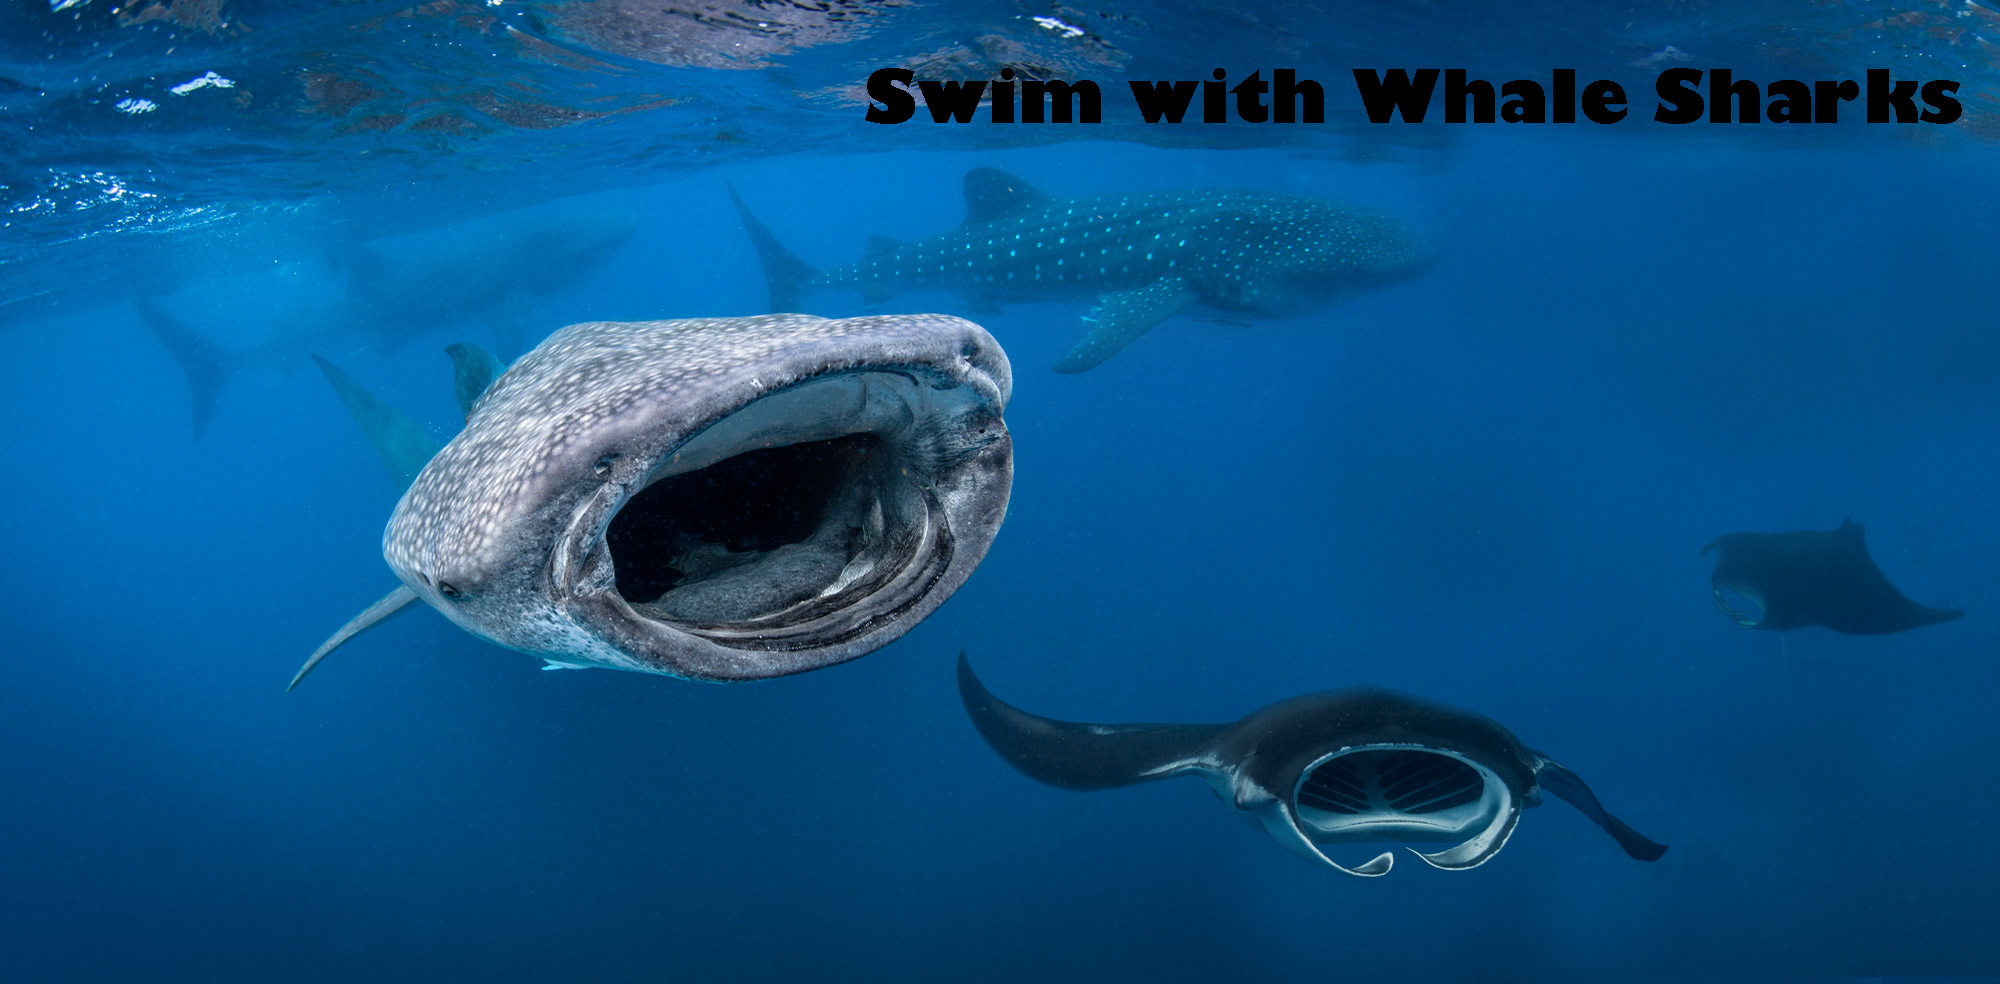 Swim with Whale Sharks and Manta rays in Isla Mujeres Mexico